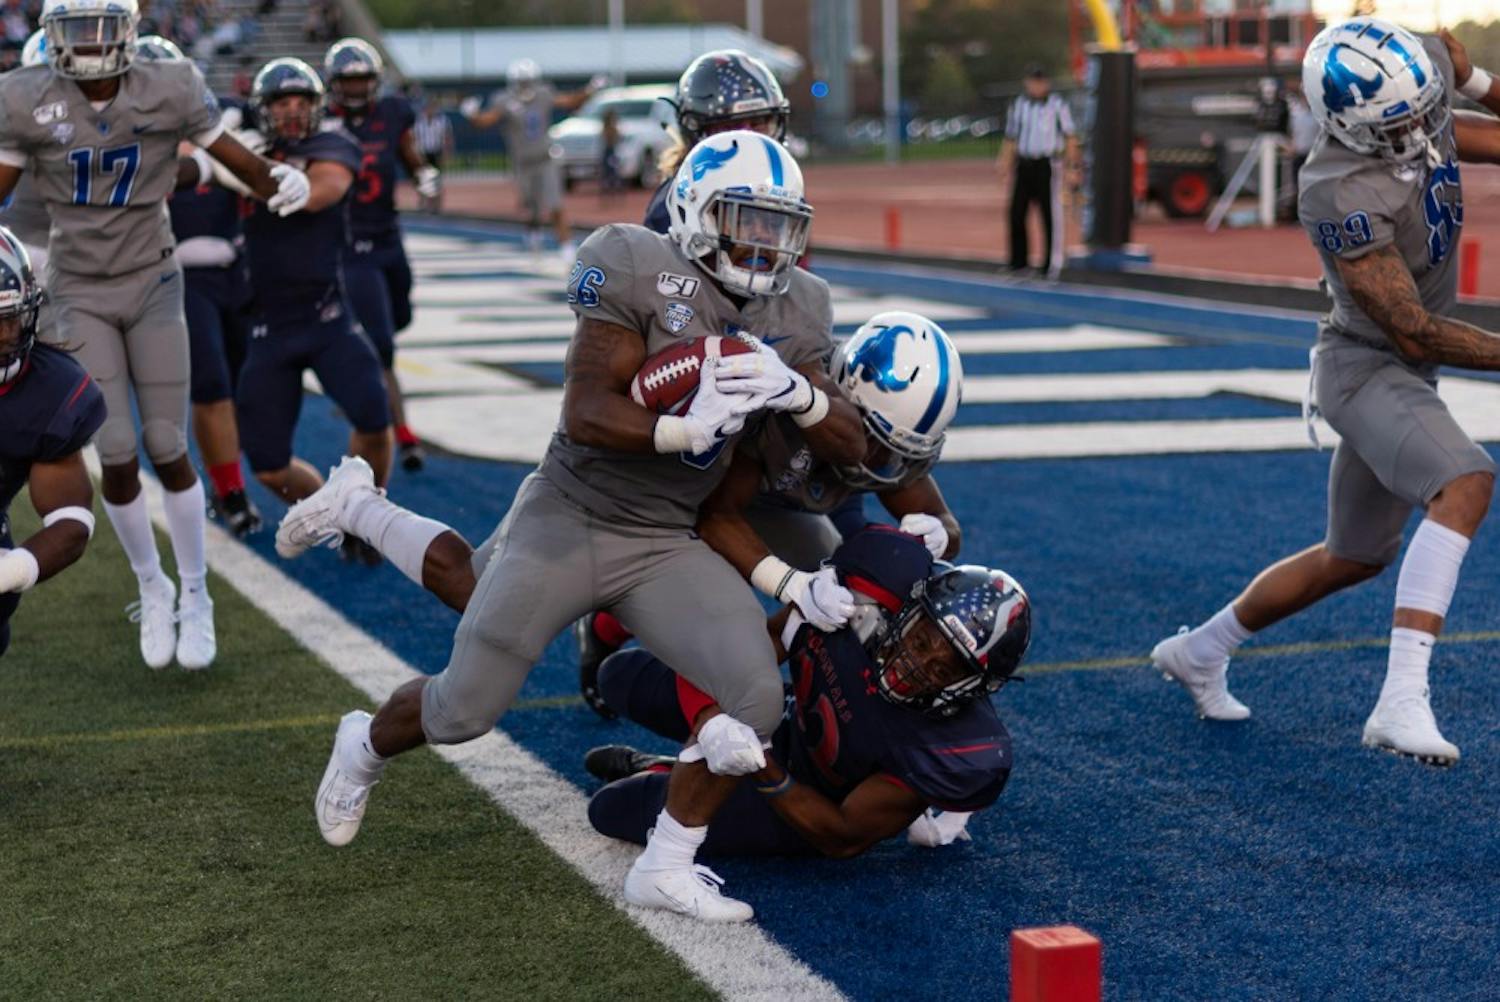 UB running back Jaret Patterson takes one to the end zone last season as the Bulls defeated Robert Morris 38-10.